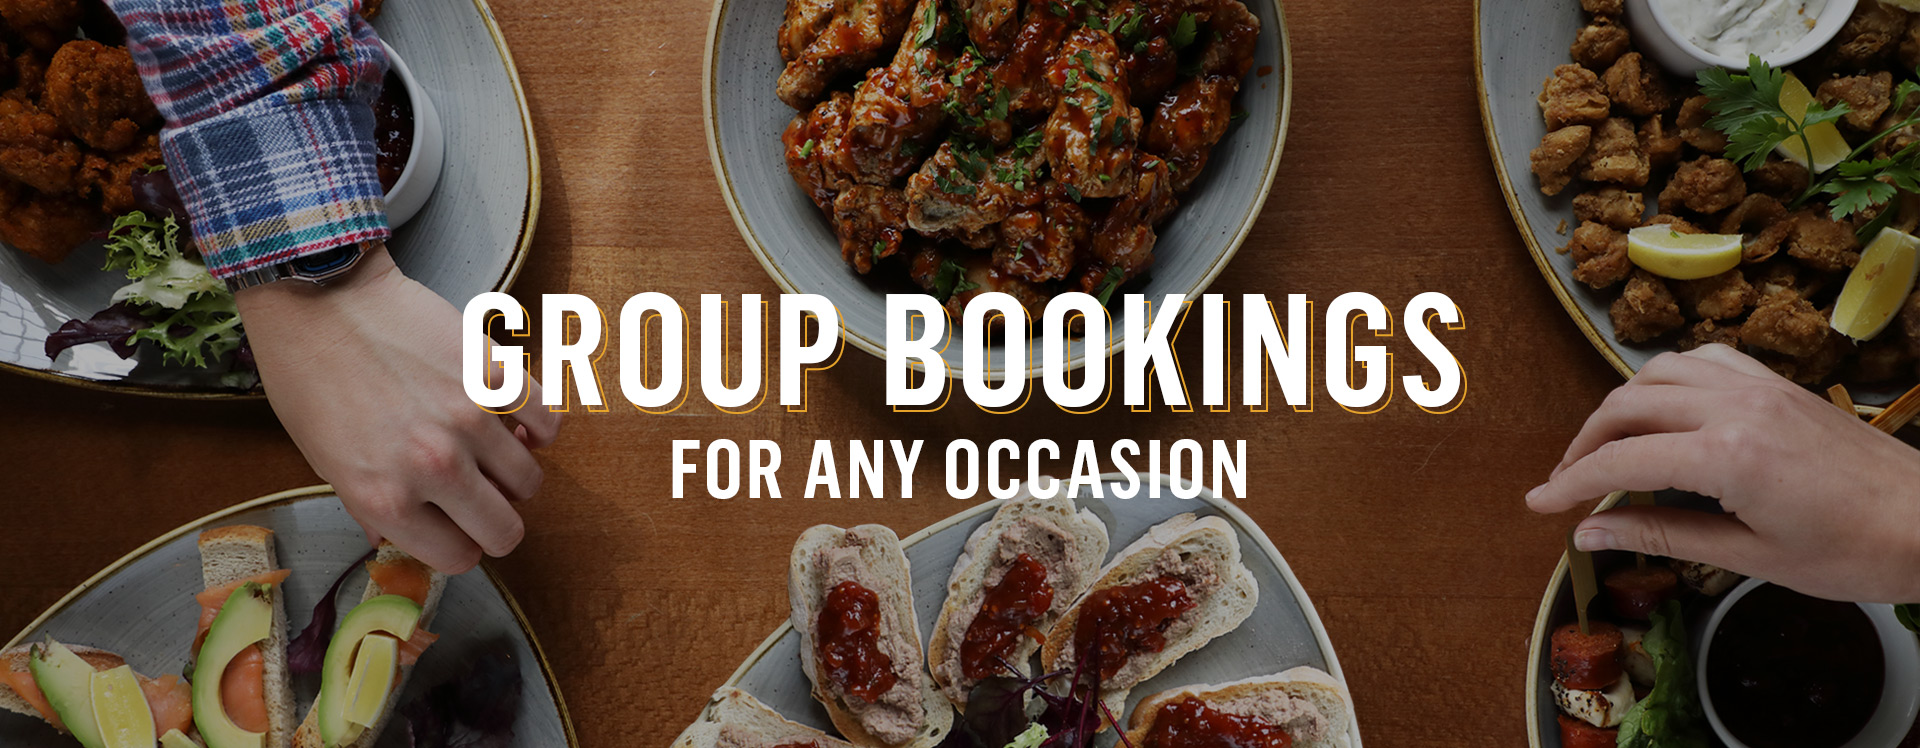 Group Bookings at The Wellington